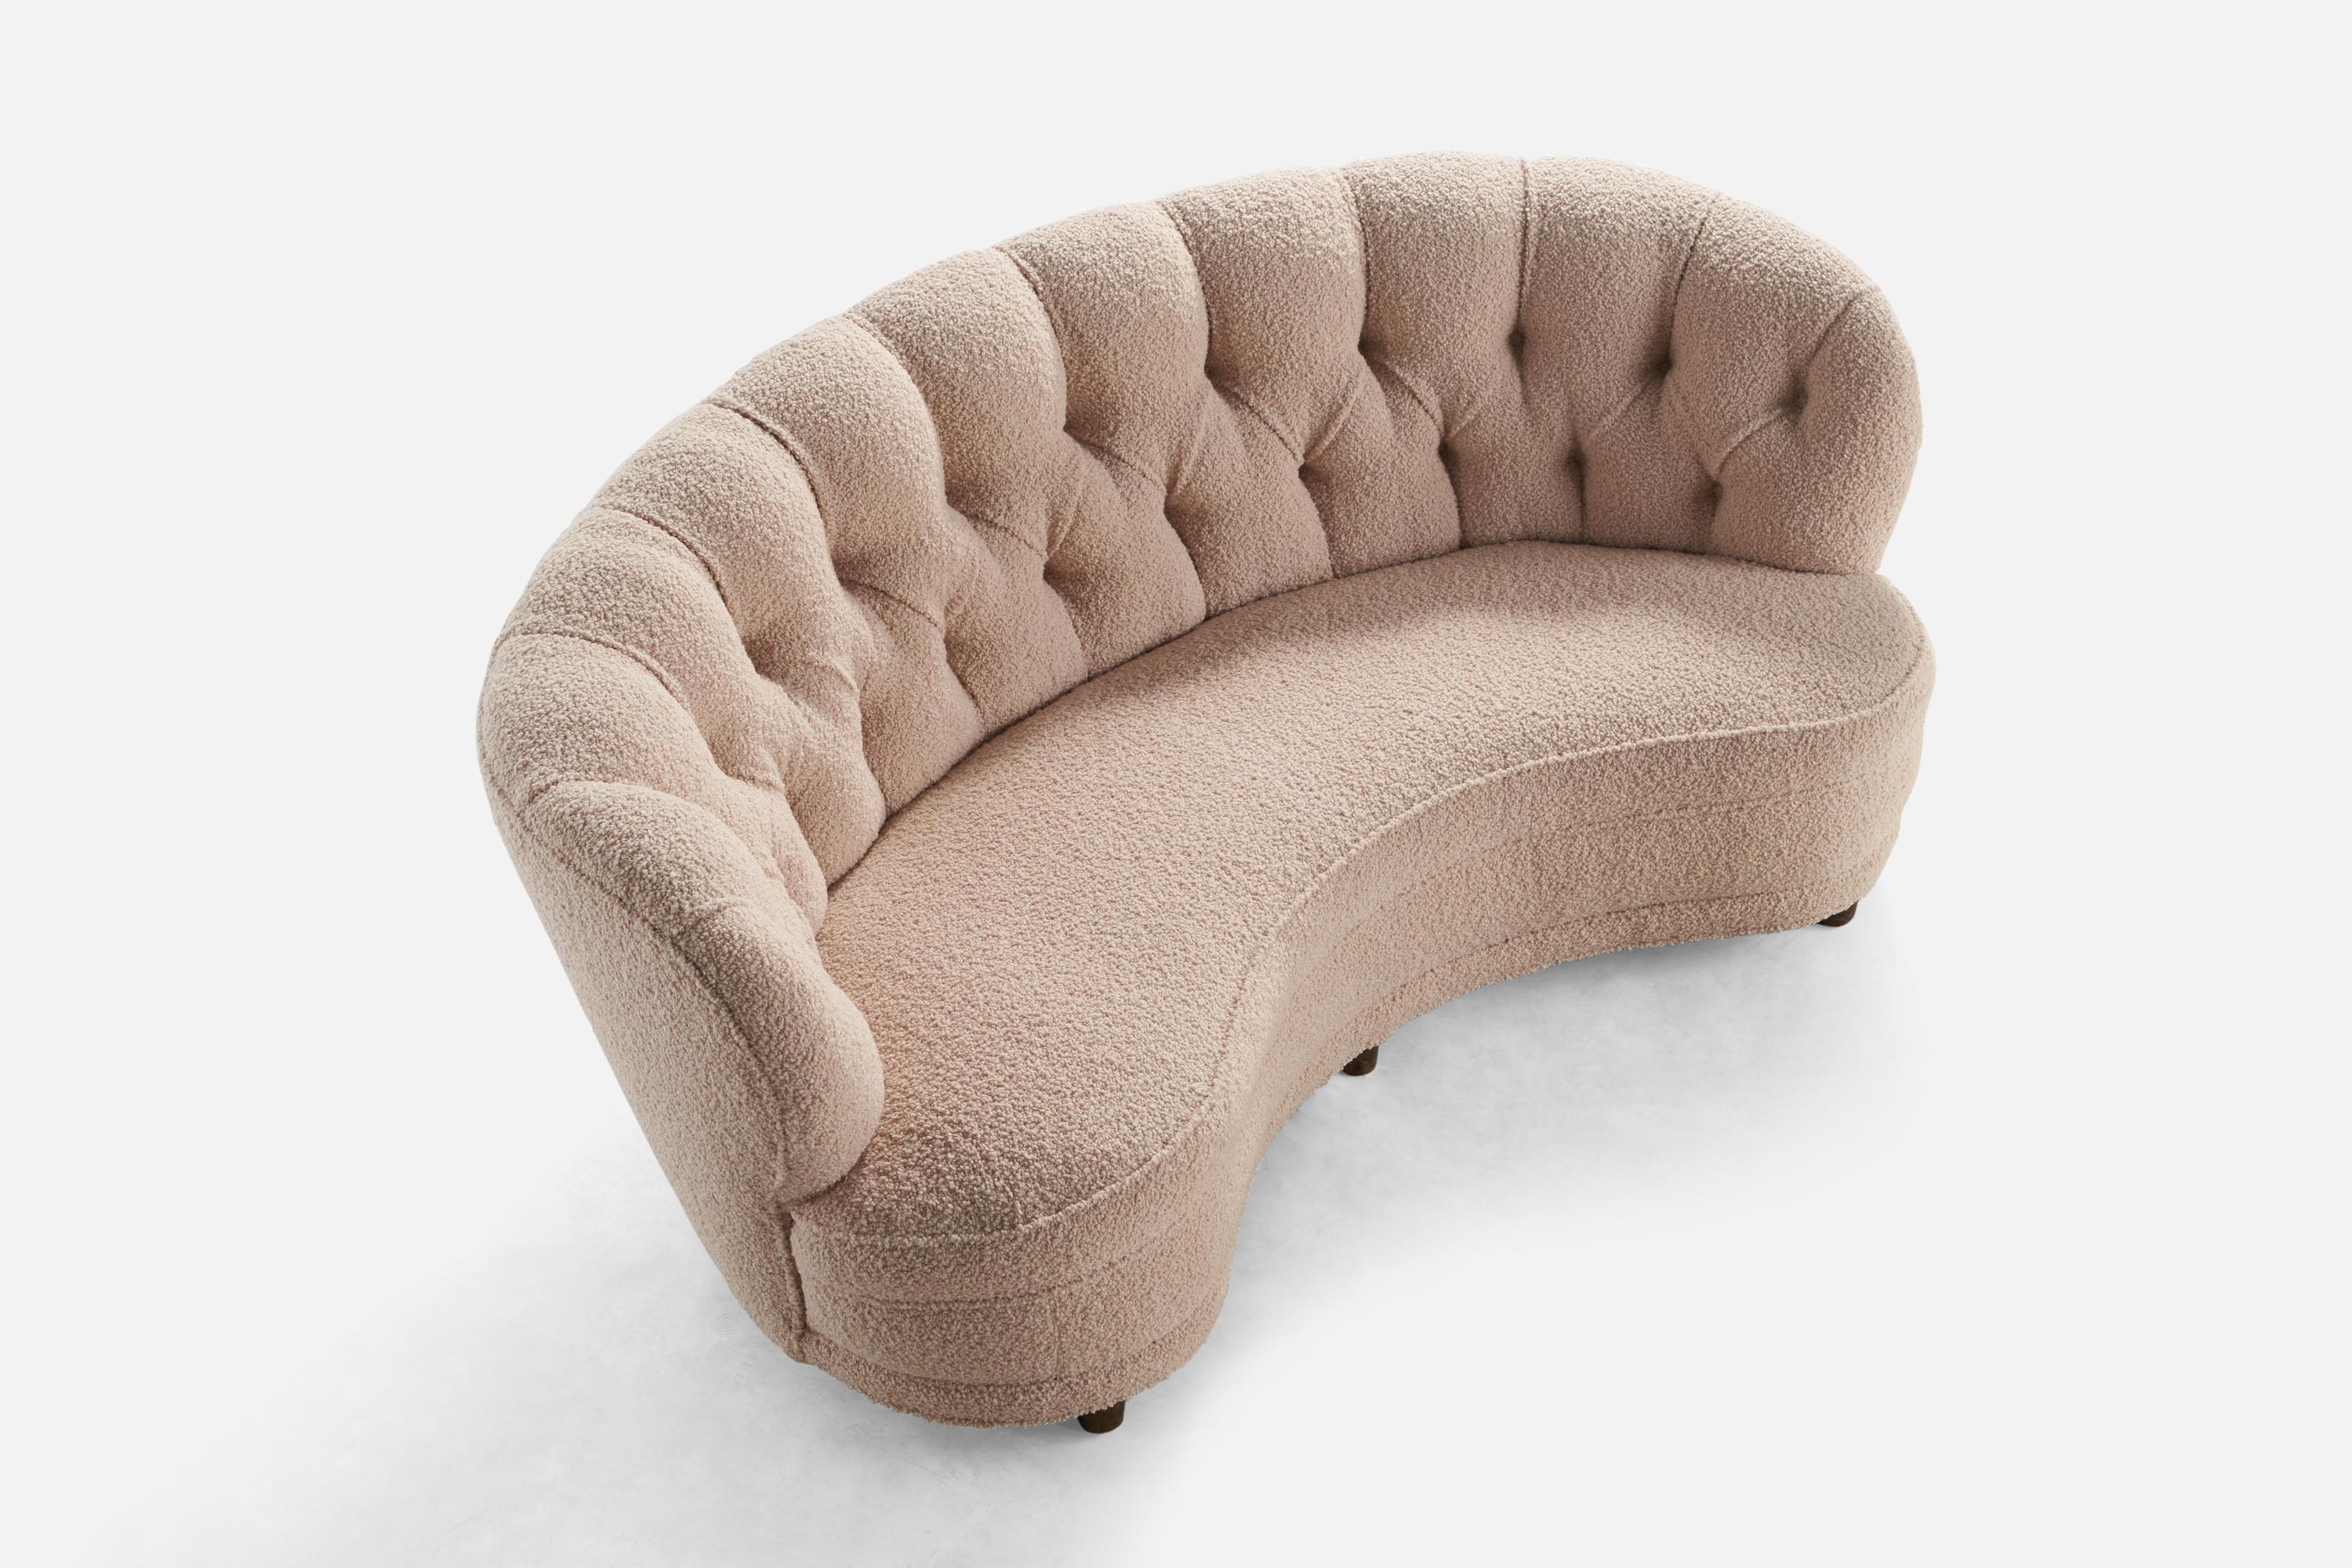 An organic curved dark-stained birch and light pink bouclé fabric sofa designed and produced in Finland, 1940s.

Seat height: 15”